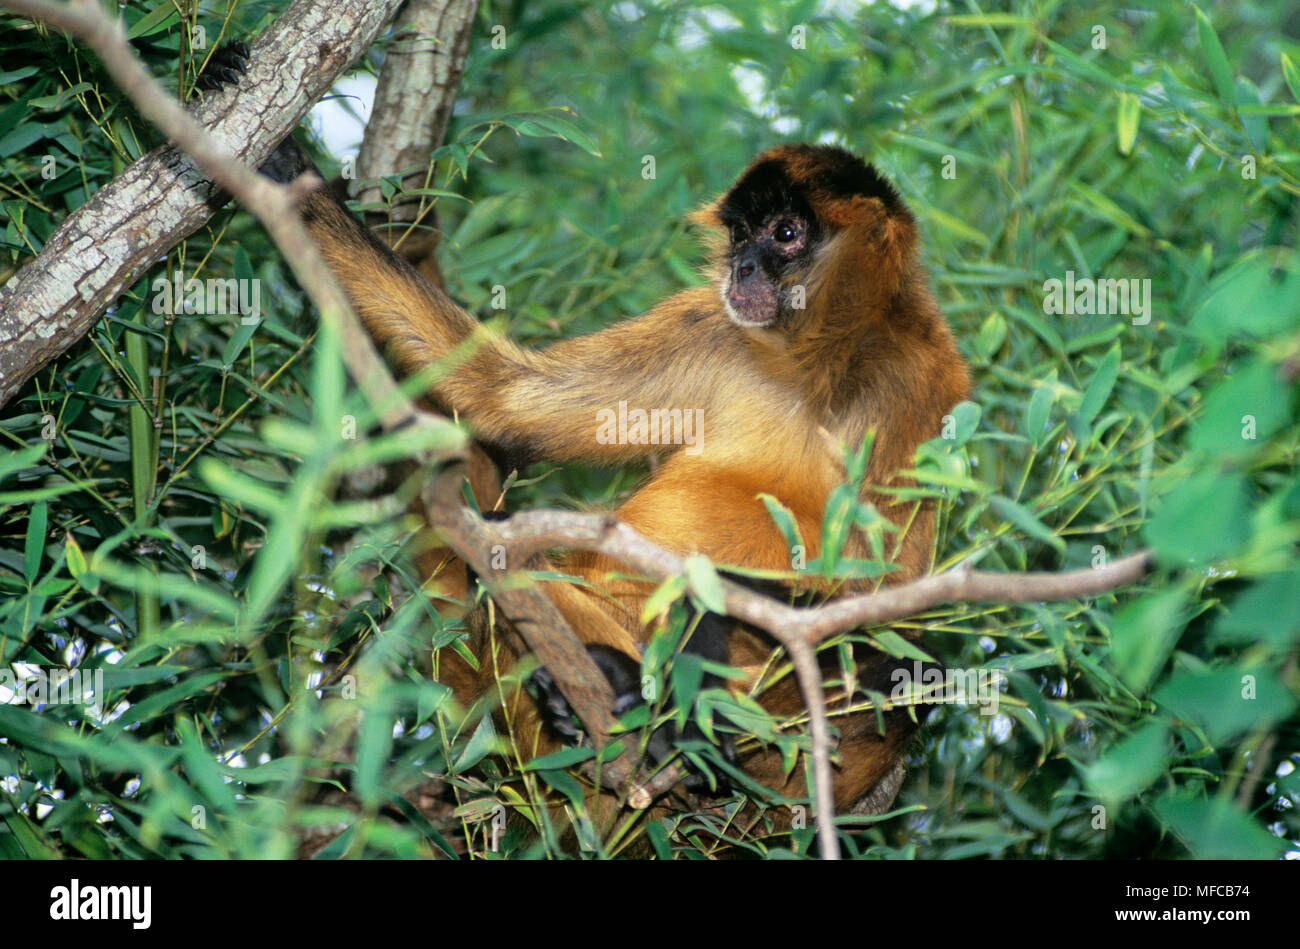 CENTRAL AMERICAN SPIDER MONKEY Ateles geoffroyi panamensis in tree. Panama. Endangered. Stock Photo